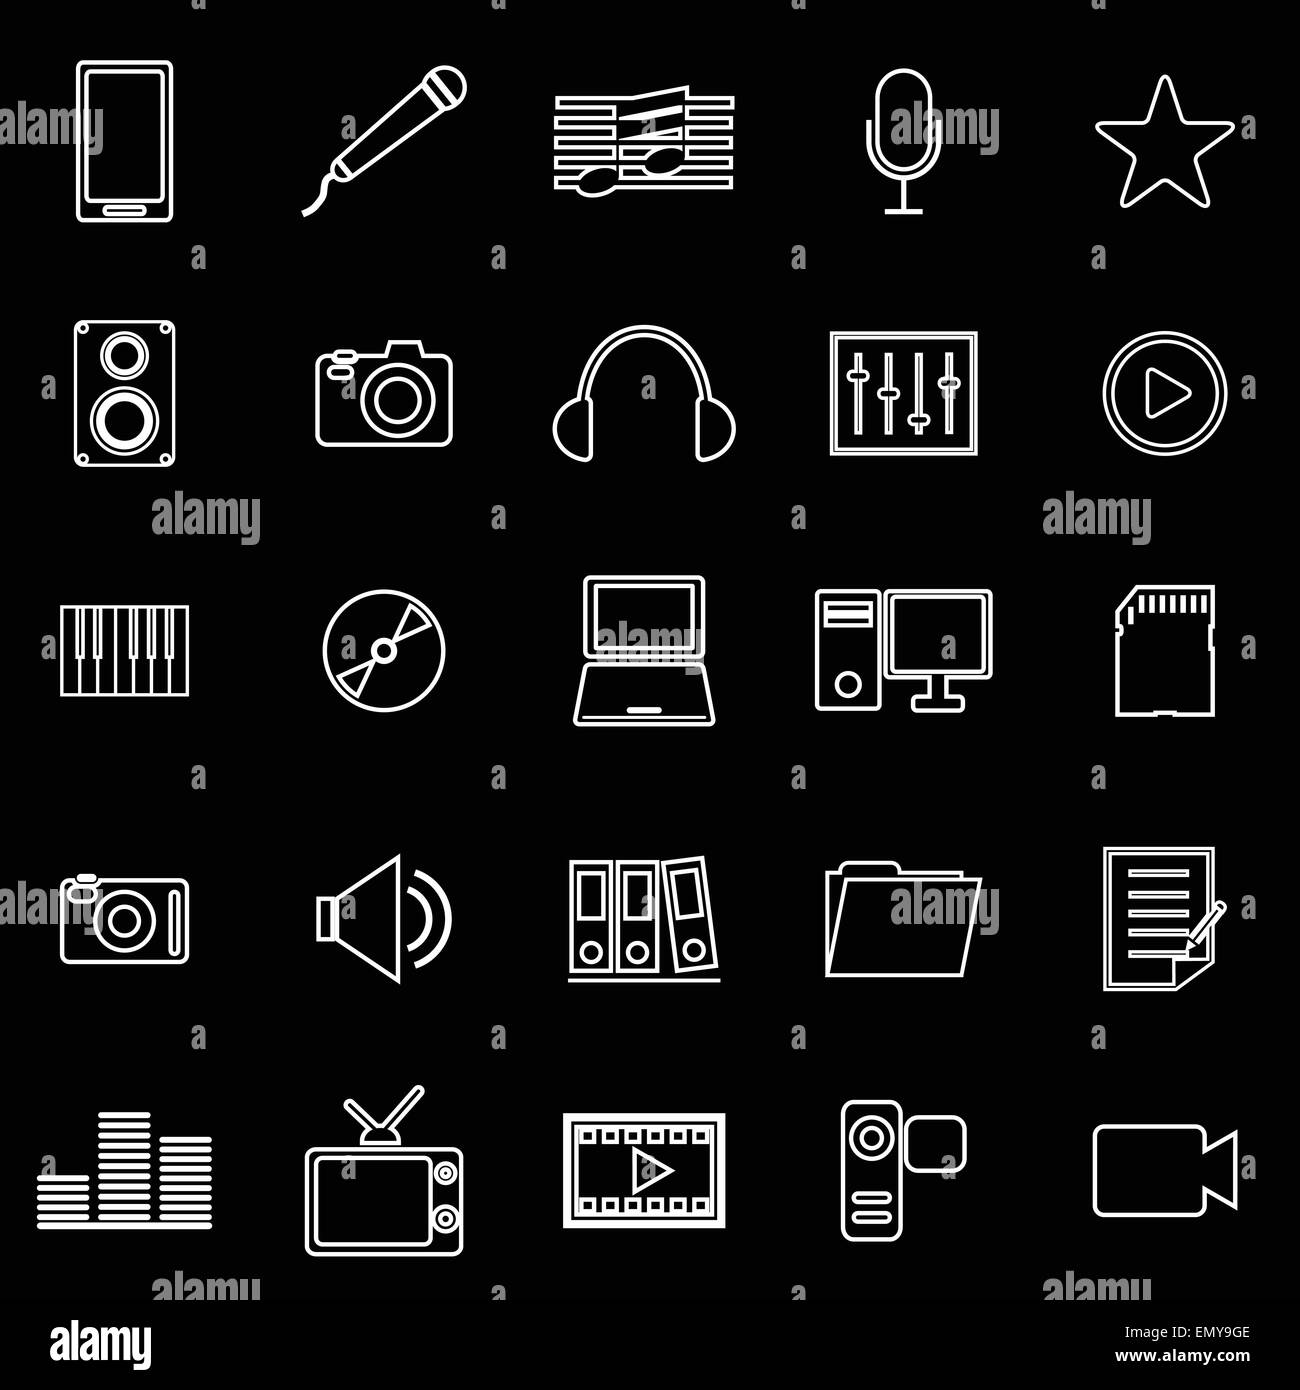 Media line icons on black background, stock vector Stock Vector